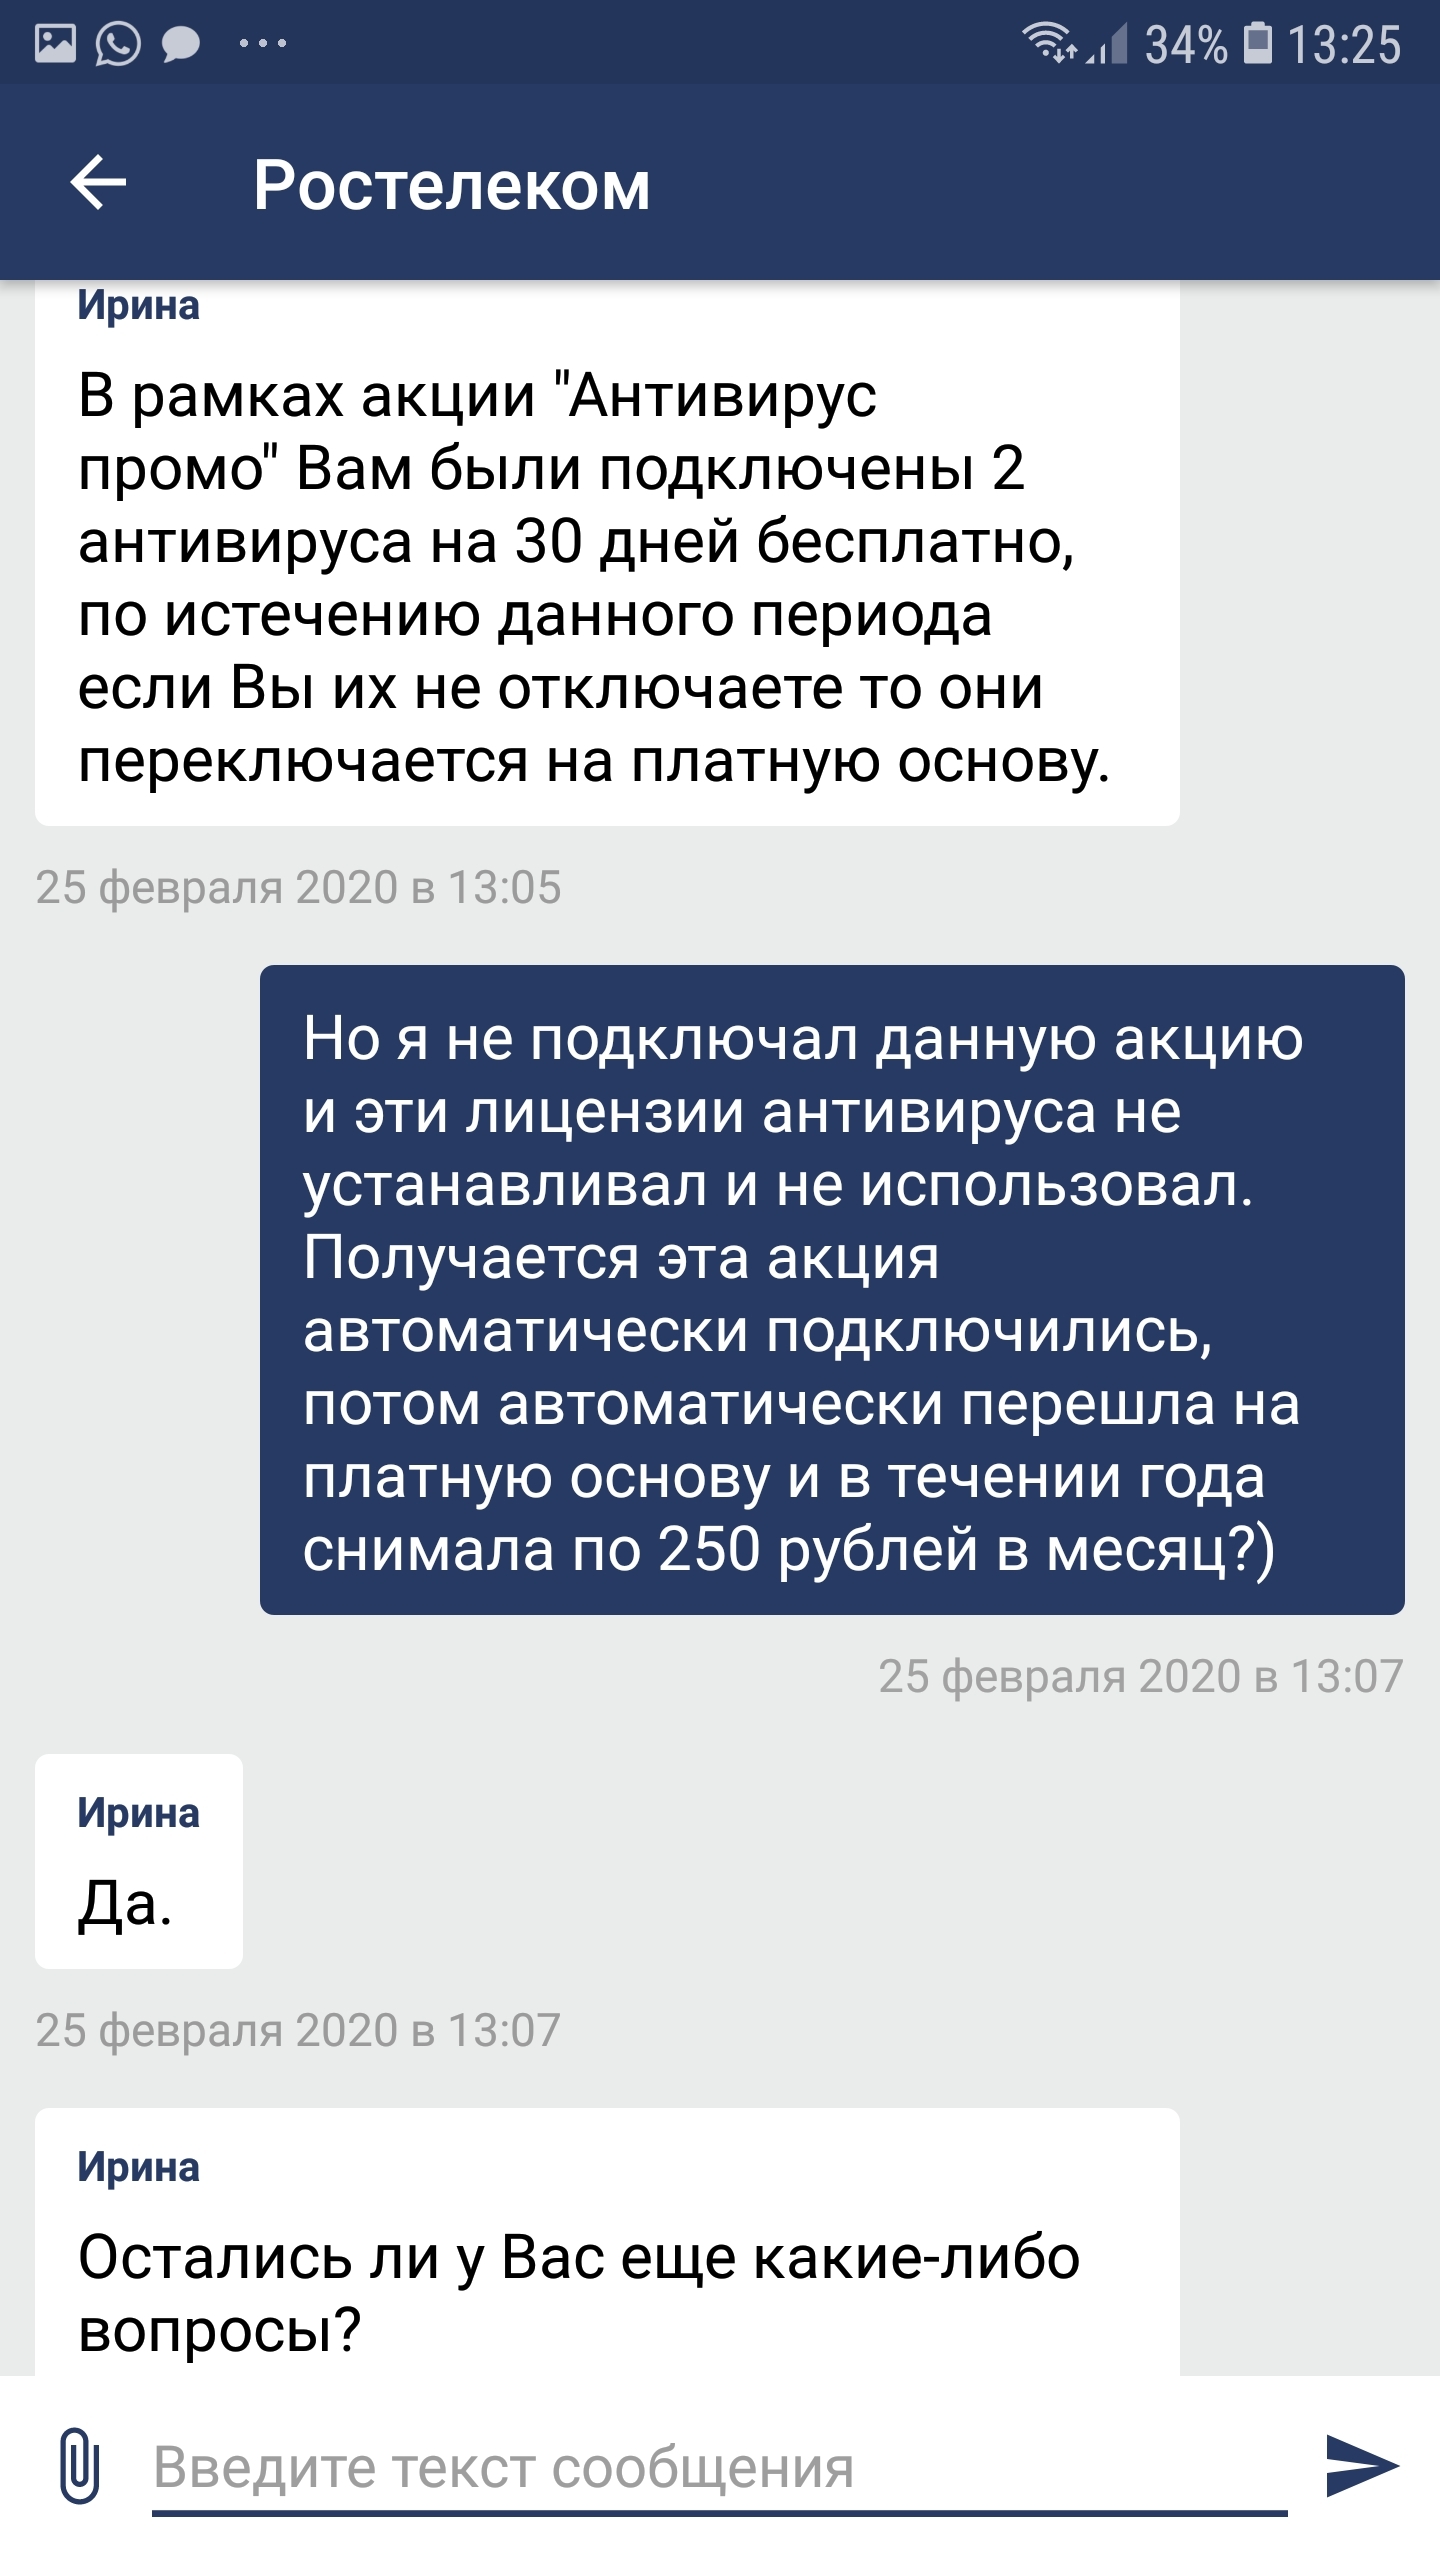 Automation and sincerity of Rostelecom - My, Rostelecom, Payment, Subscription fee, A complaint, Service imposition, Correspondence